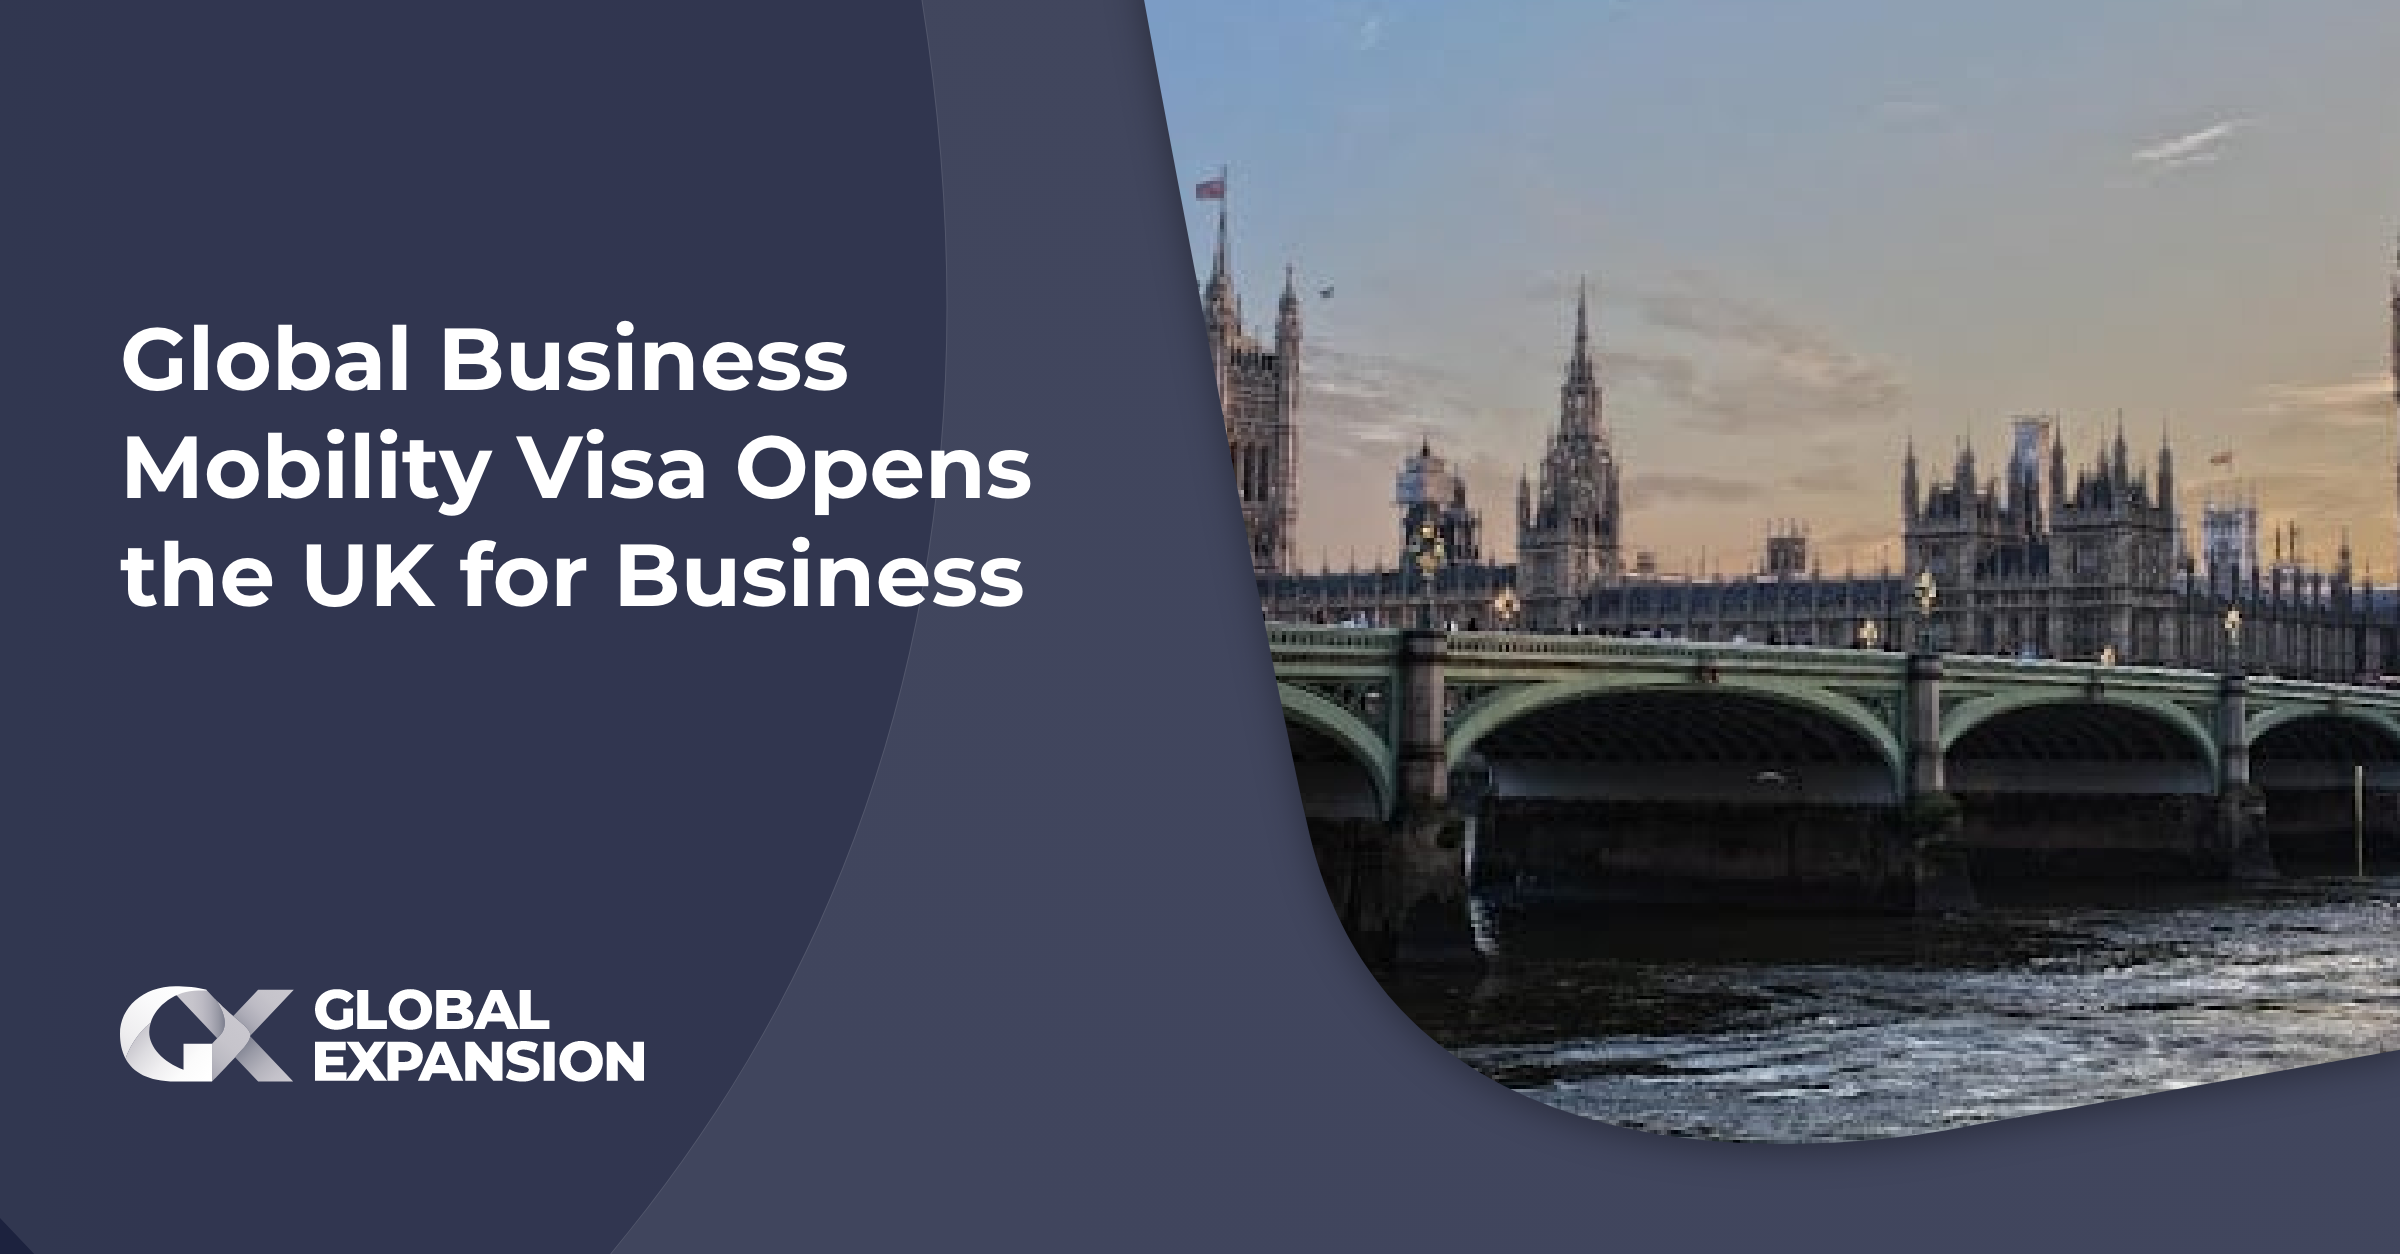 Global Business Mobility Visa Opens the UK for Business